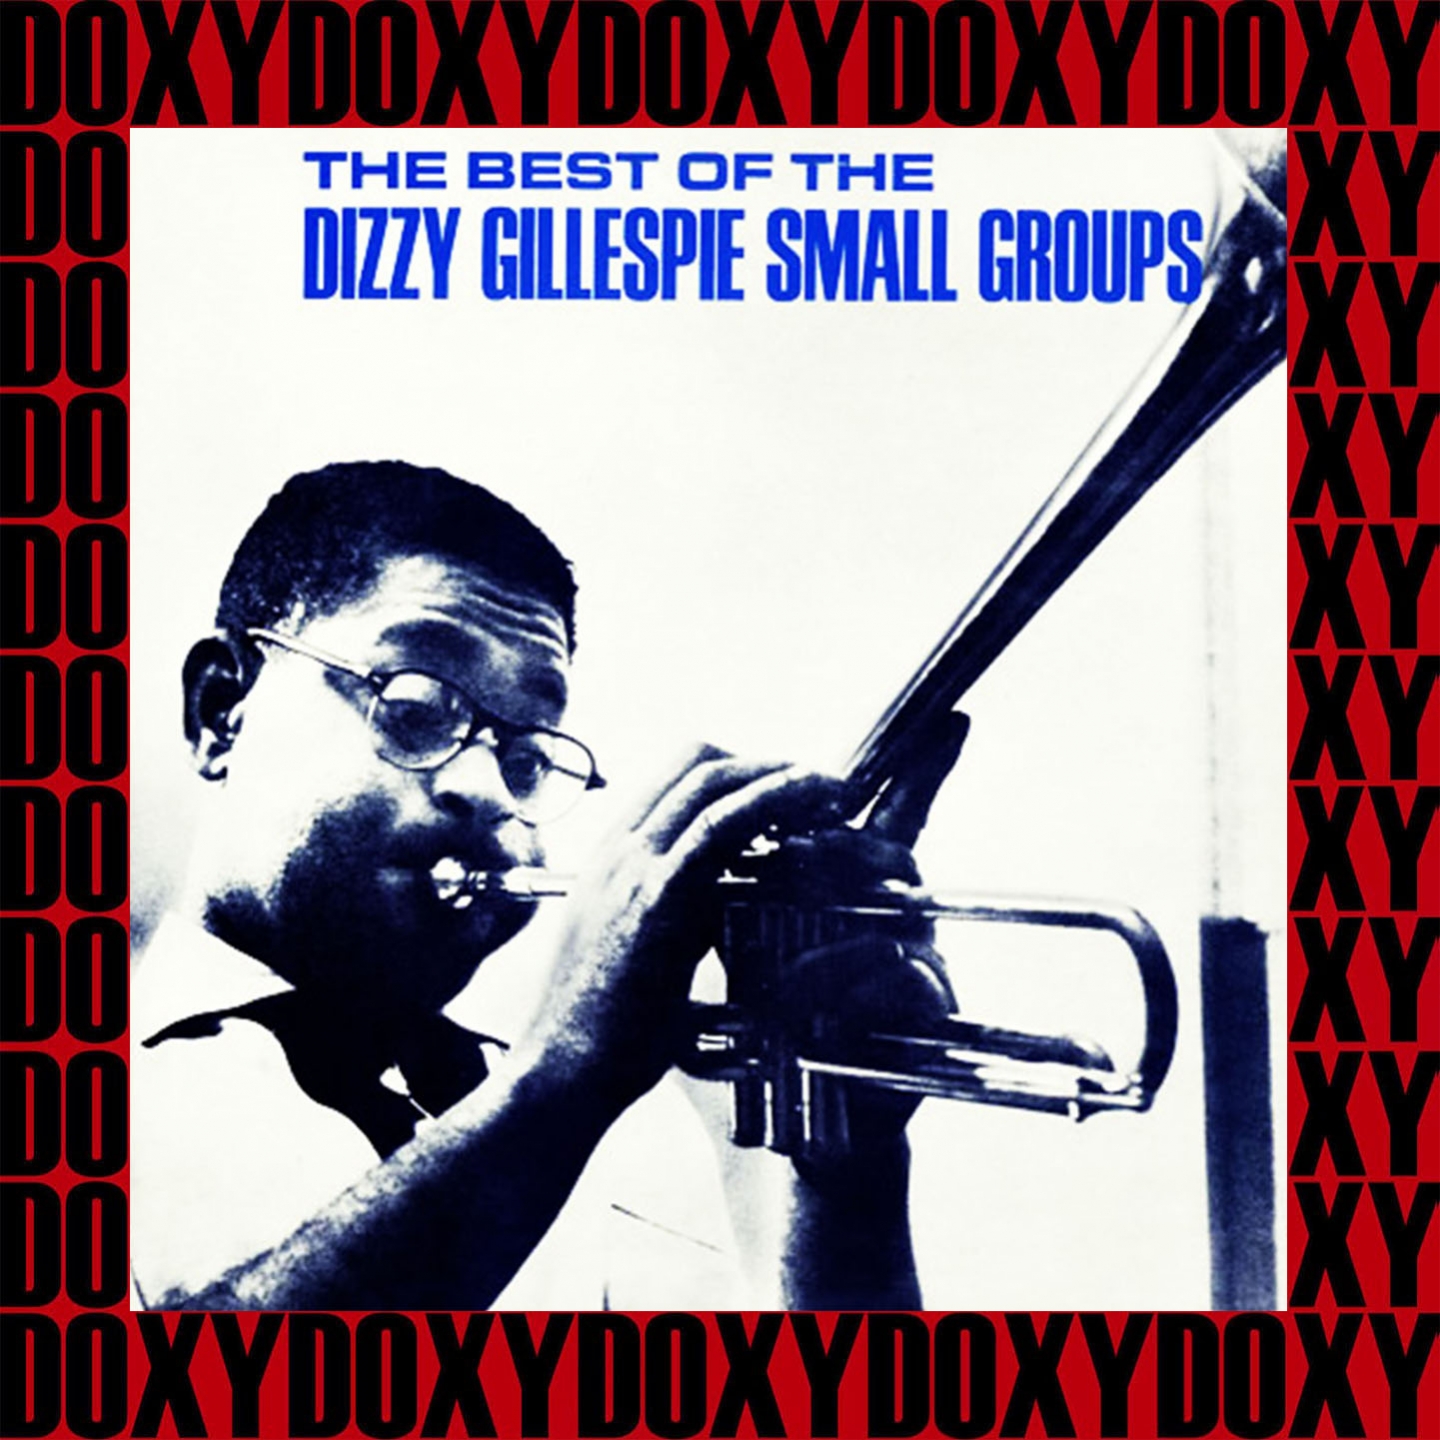 The Best Of The Dizzy Gillespie Small Groups (Remastered Version) (Doxy Collection)